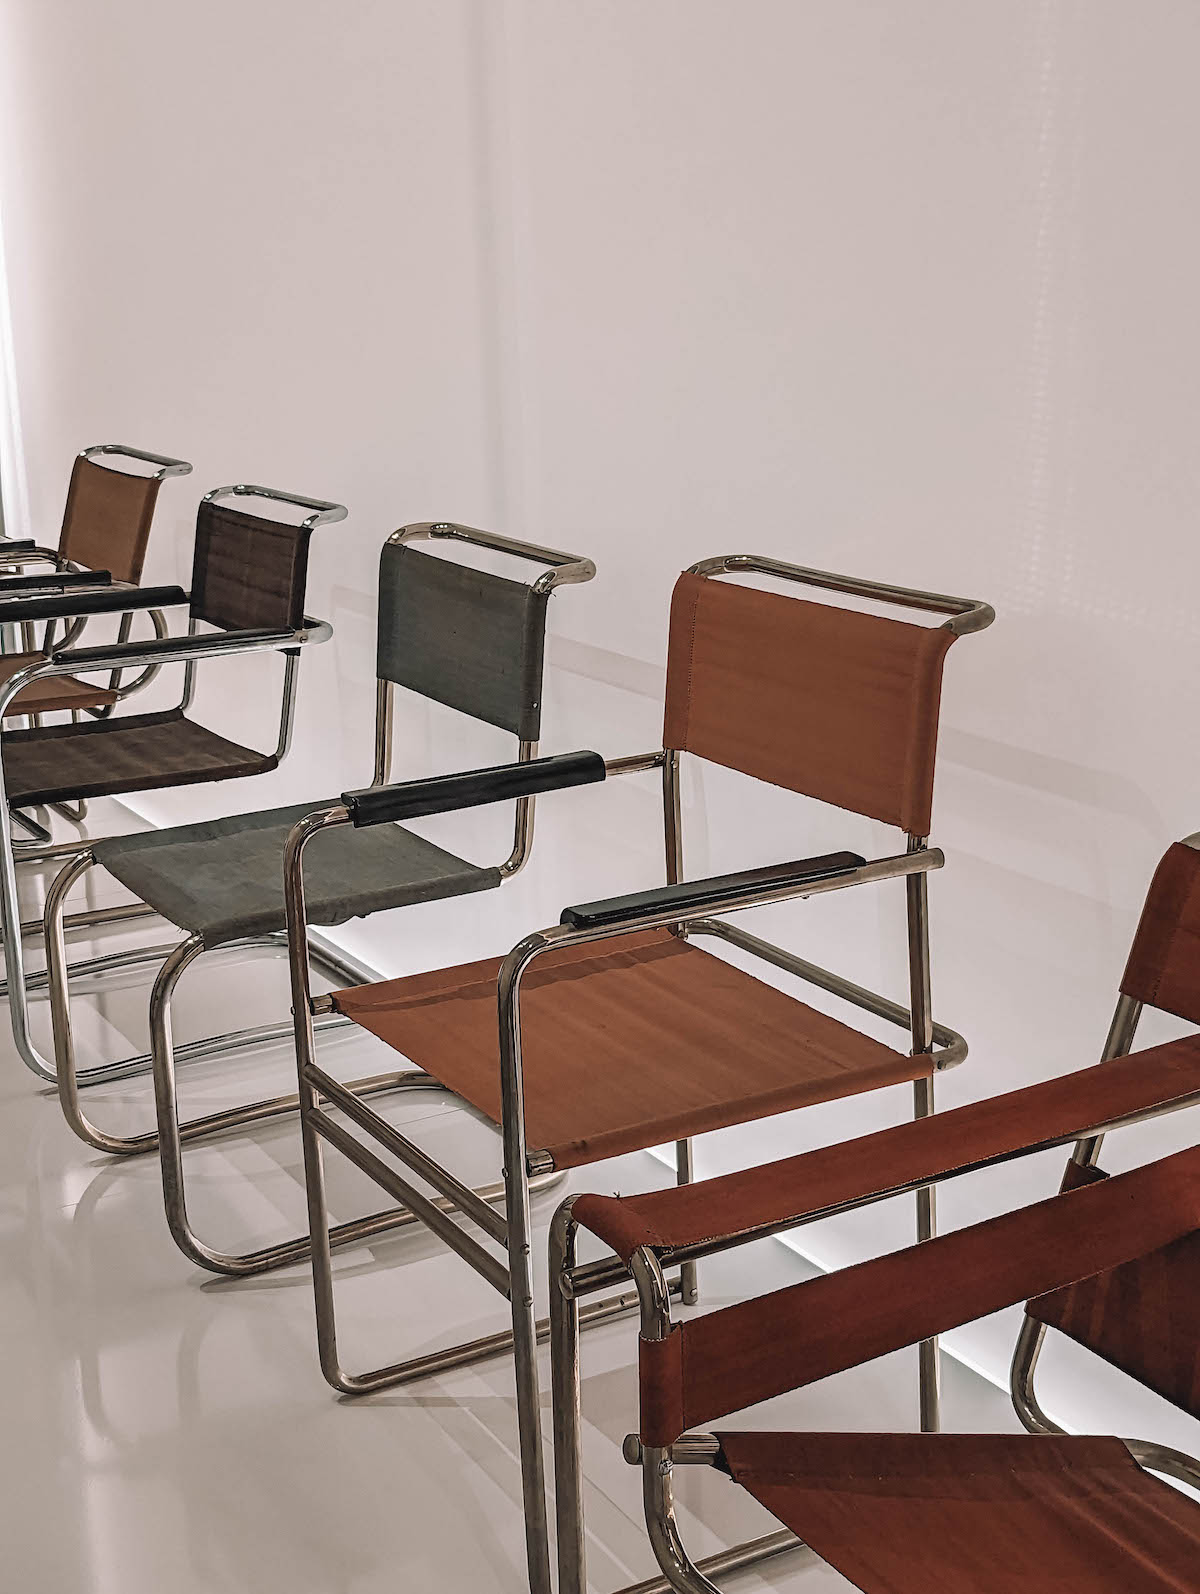 Chairs at the Bauhaus Museum in Weimar